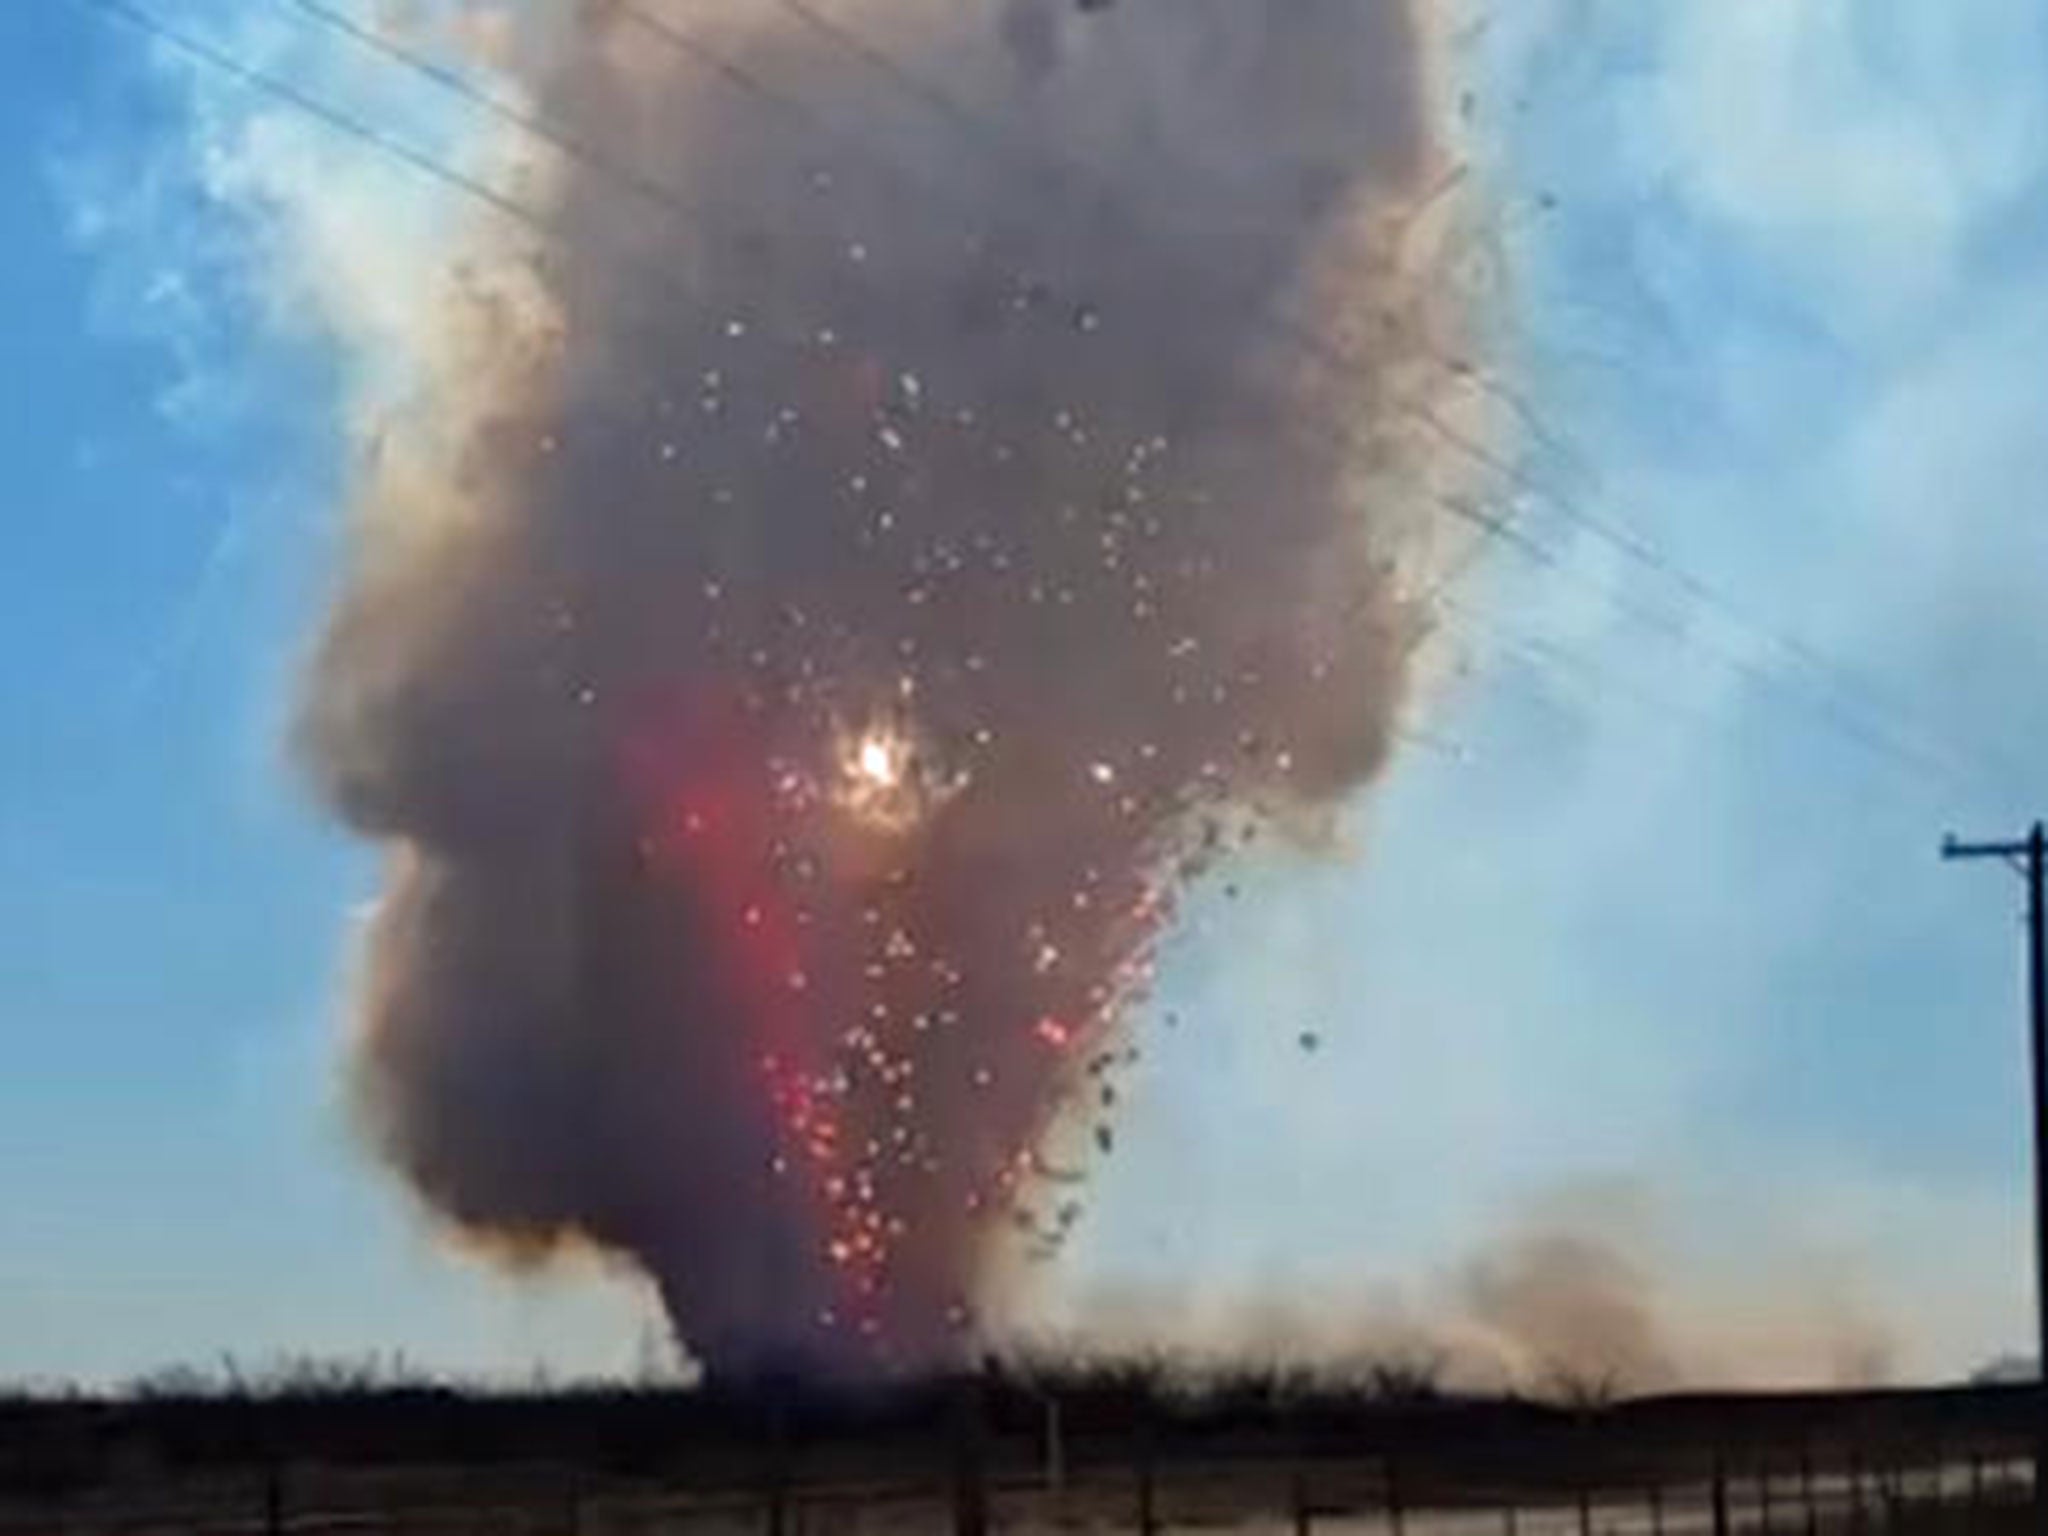 20,000 pounds worth of fireworks were destroyed by Midland Police